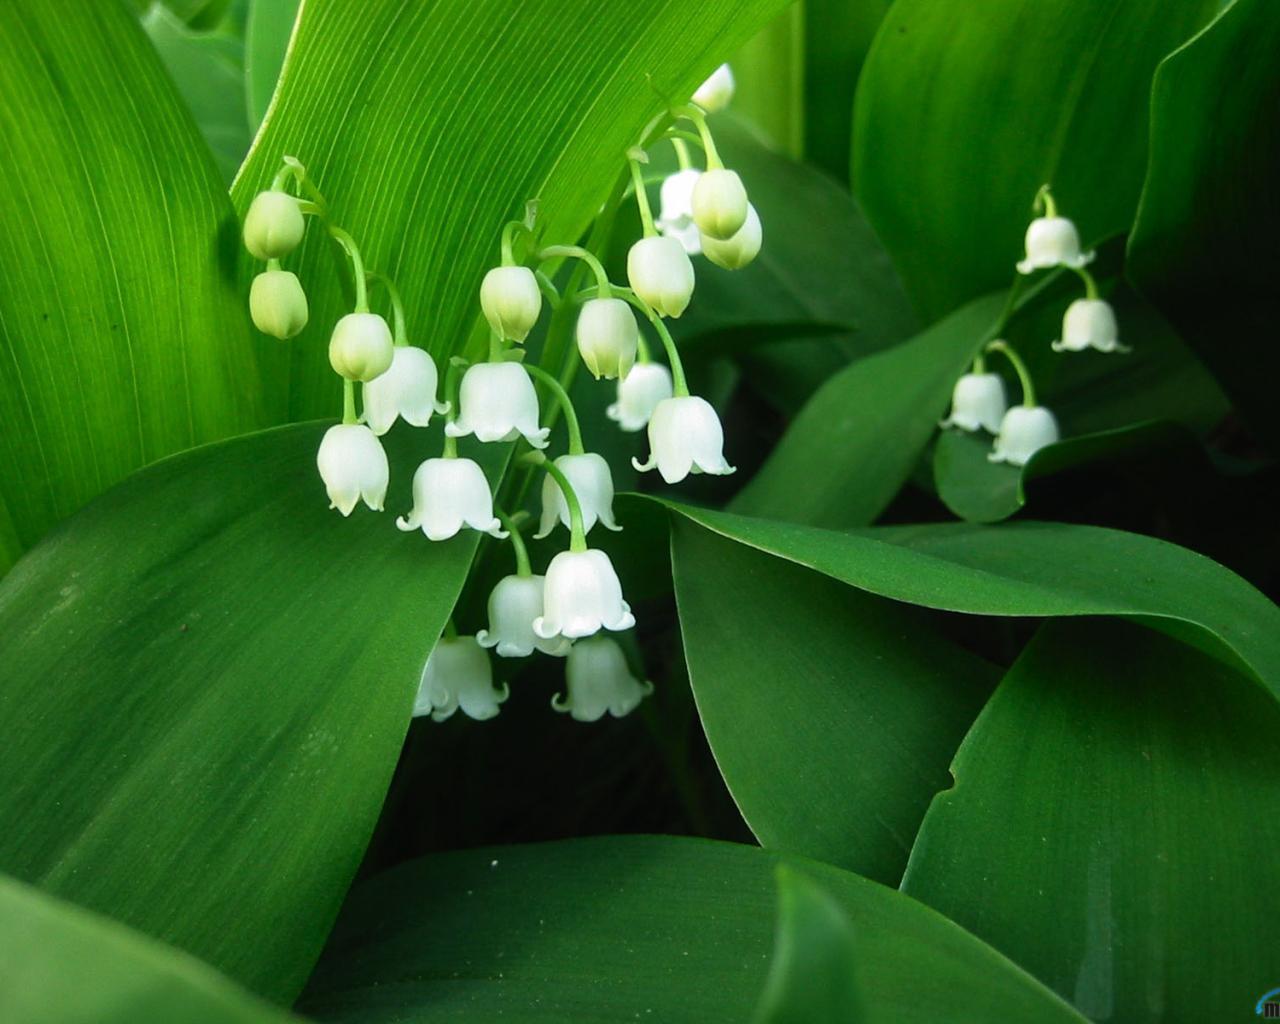 lily of the valley, plants, flowers, green